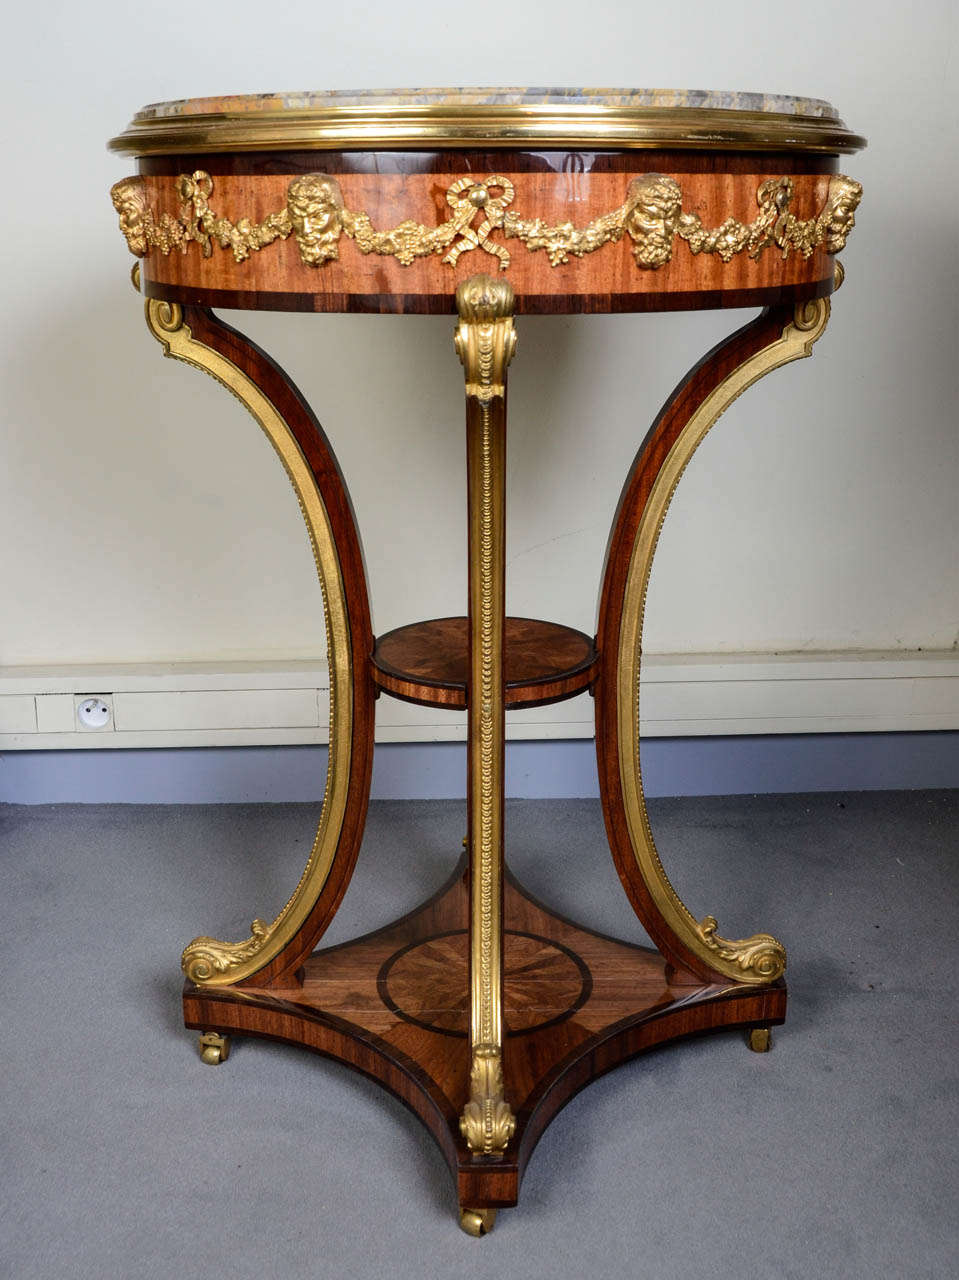 Round gueridon, with a rose beam decor with a rosewood frame and background. Quadripode base in carved and gilded bronze. Two shelves on the legs structure. Breche-like marble. Marble top repaired on the middle.